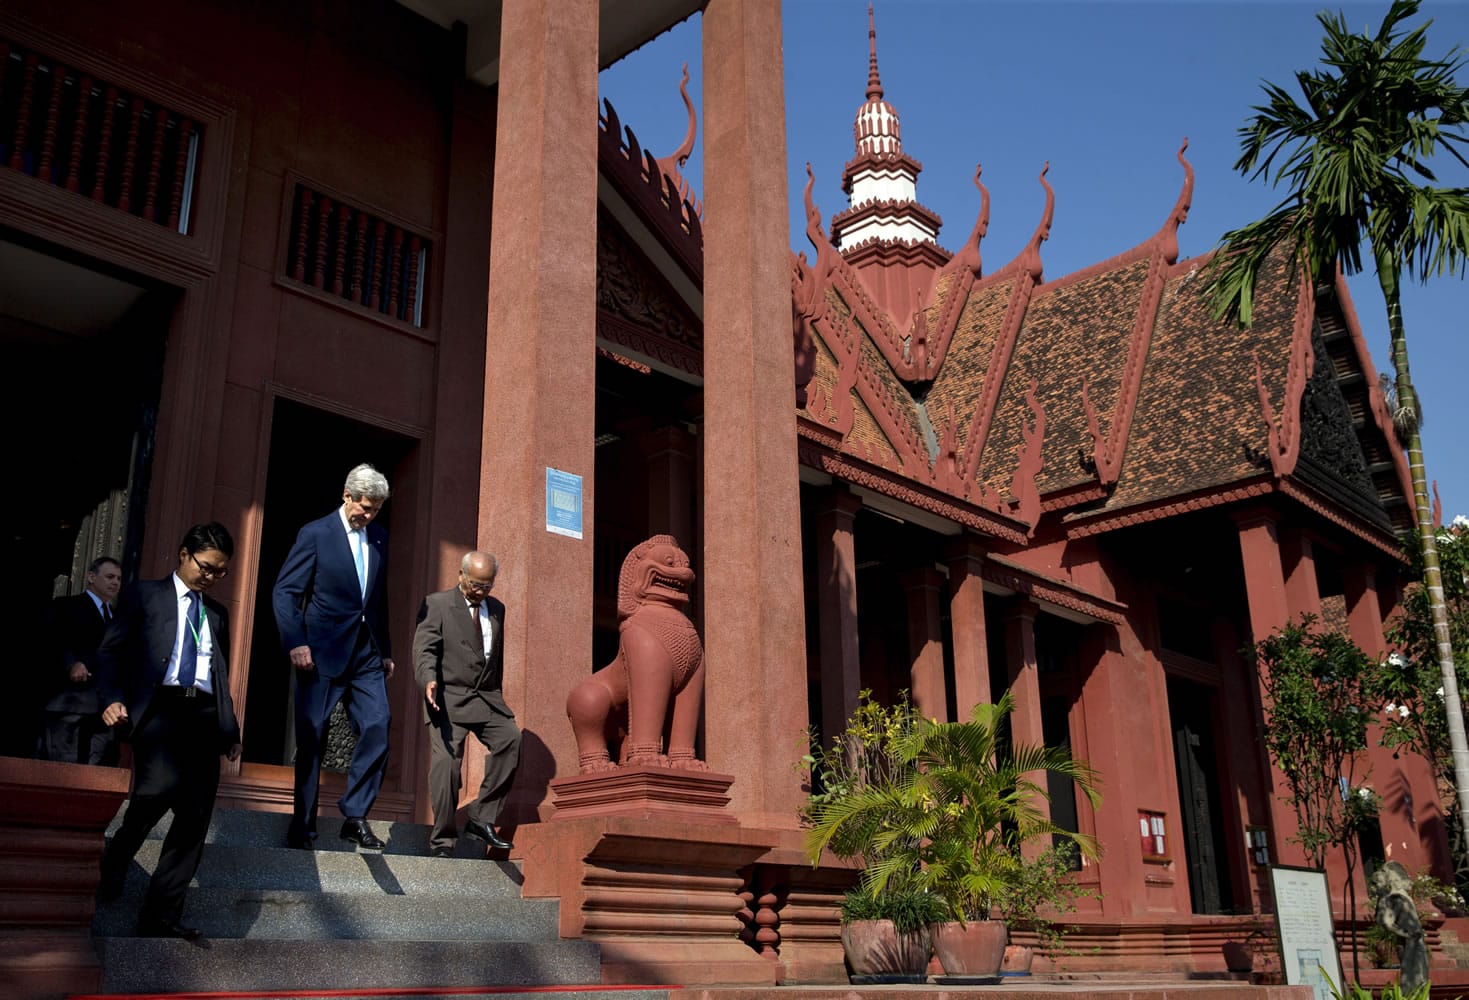 Secretary of State John Kerry, third from left, leaves a tour of the National Museum of Cambodia with Cambodian officials on Tuesday in Phnom Penh, Cambodia.